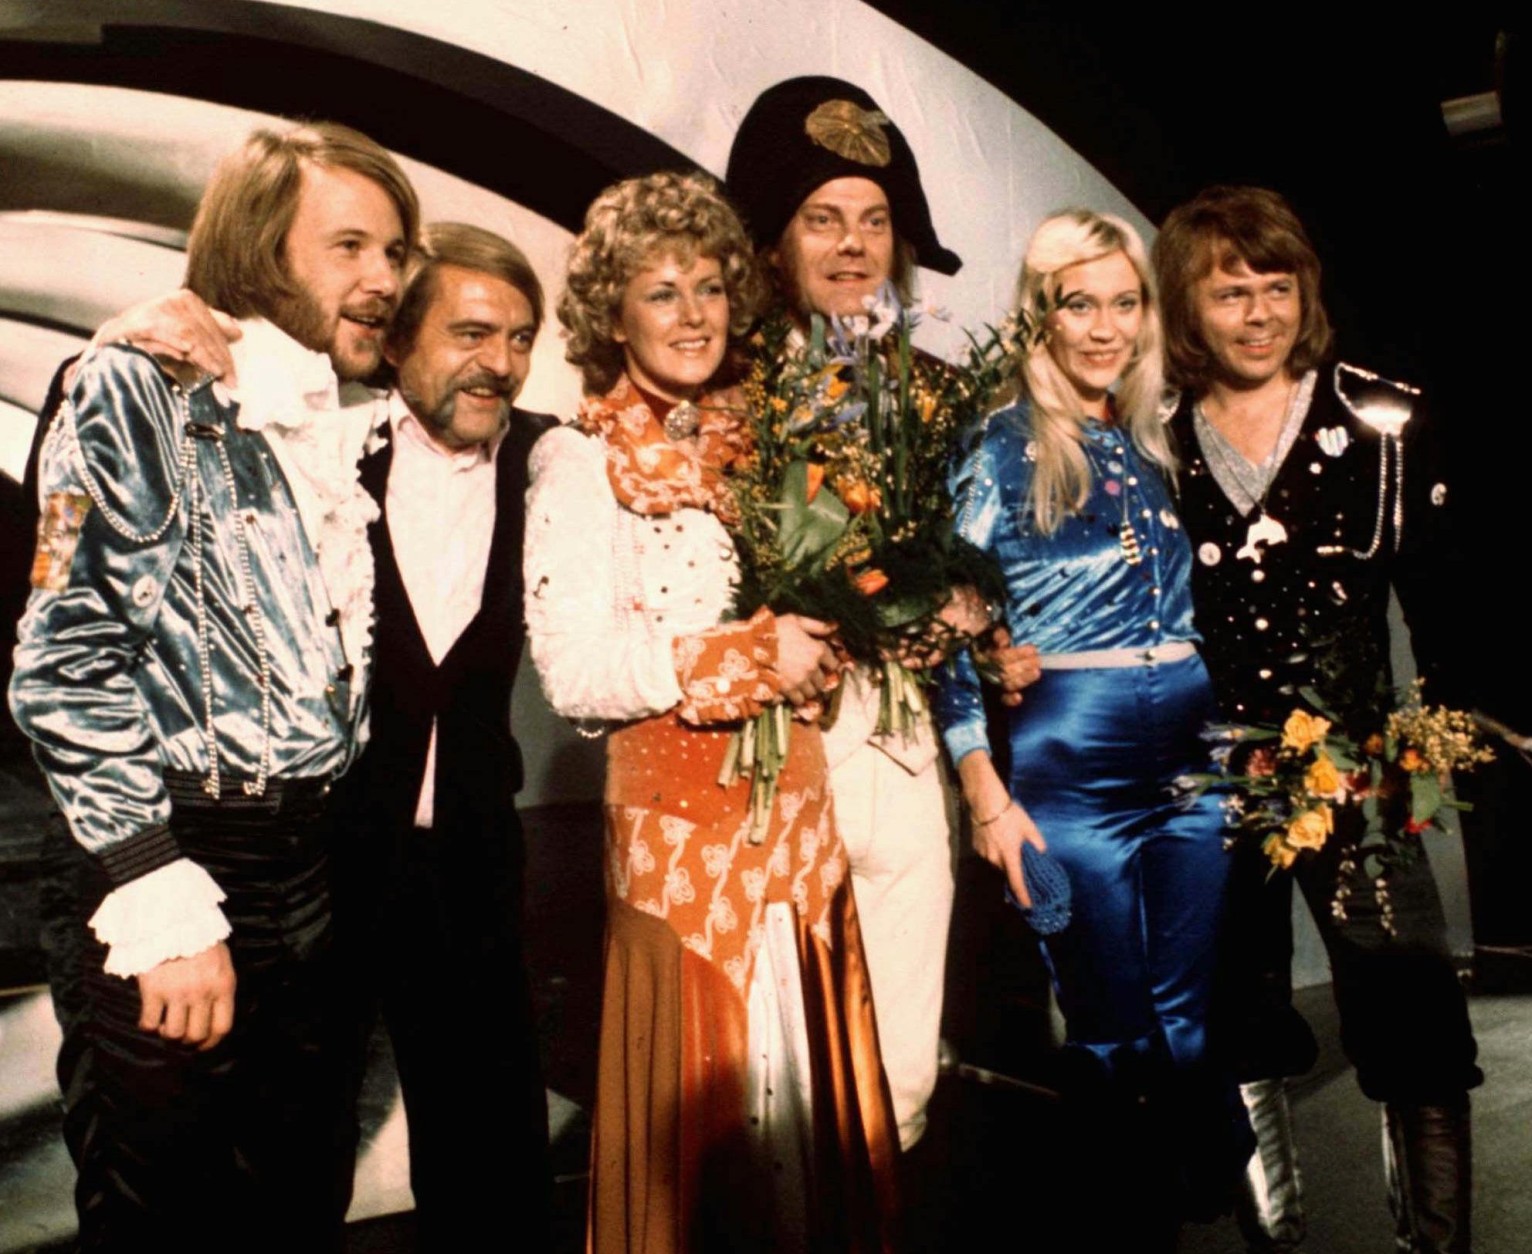 Stig "Stikkan" Andersson (2nd left) is shown with pop group "ABBA", from left Benny Andersson, Annifrid Lyngstad, conductor Sven-Olof Walldoff, Agnetha Faltskog and Bjorn Ulvaeus in this 1974  photo after winning the Eurovision Song Contest in Brighton, England. Andersson who produced the records Swedish pop group ABBA that topped the charts around the globe during the 1970s and 80s died of a heart attack Friday Sept. 12, 1997 aged 66. (AP Photo/File)